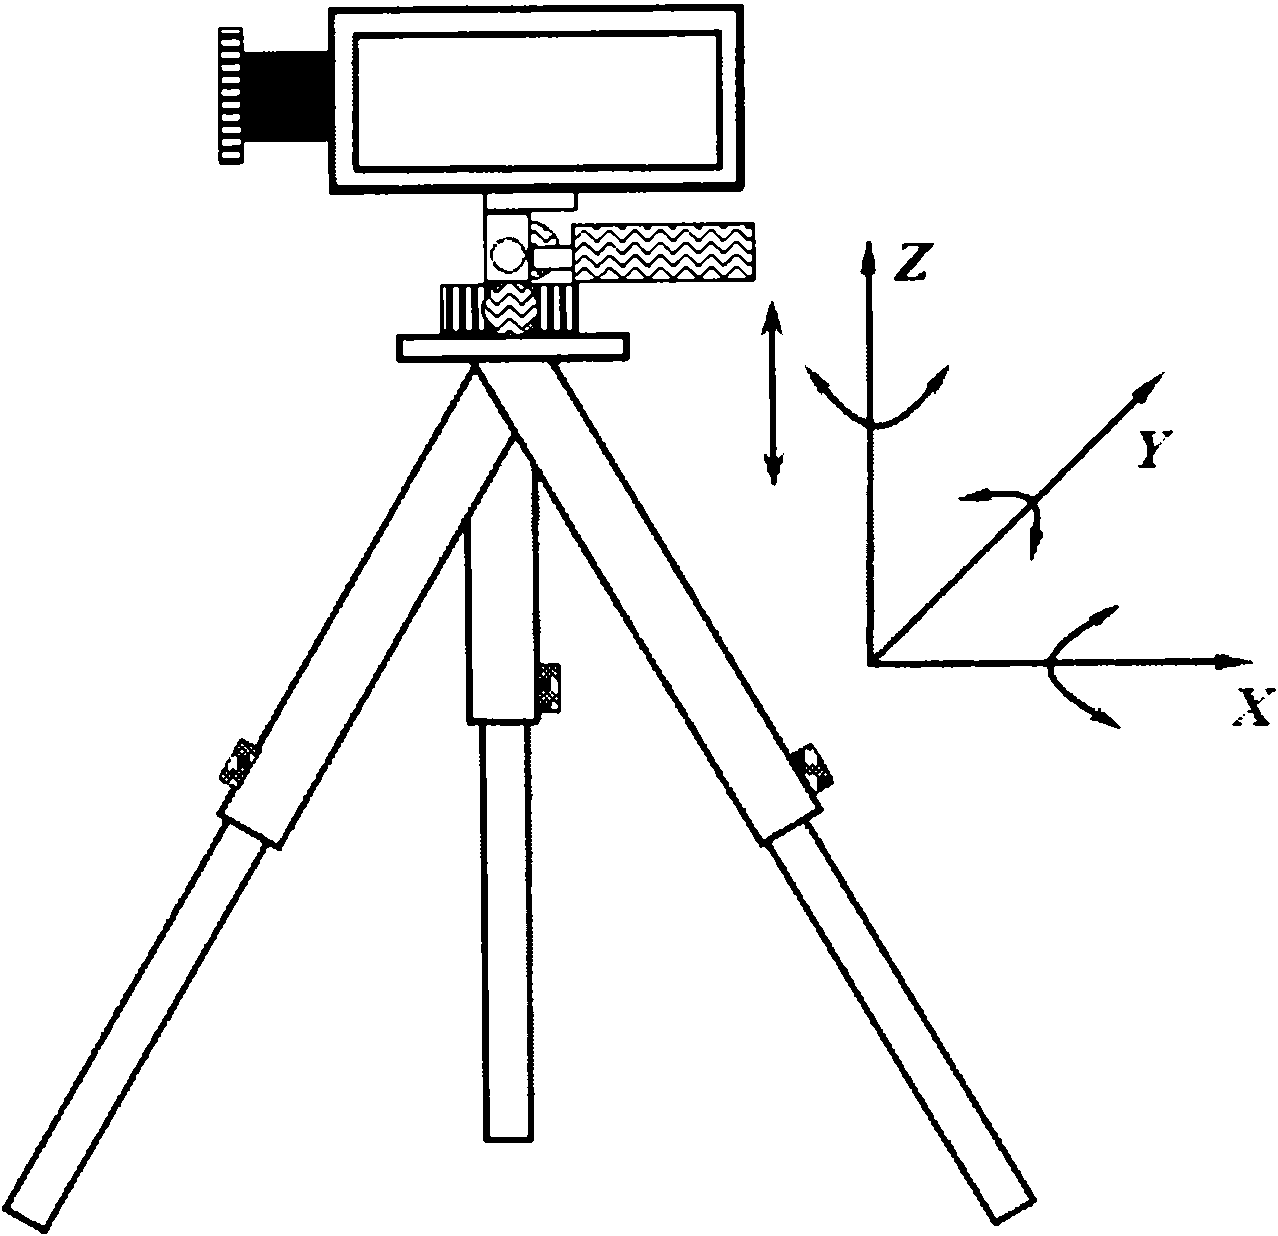 Infrared lock-in thermal wave non-destructive detection method based on image sequence processing